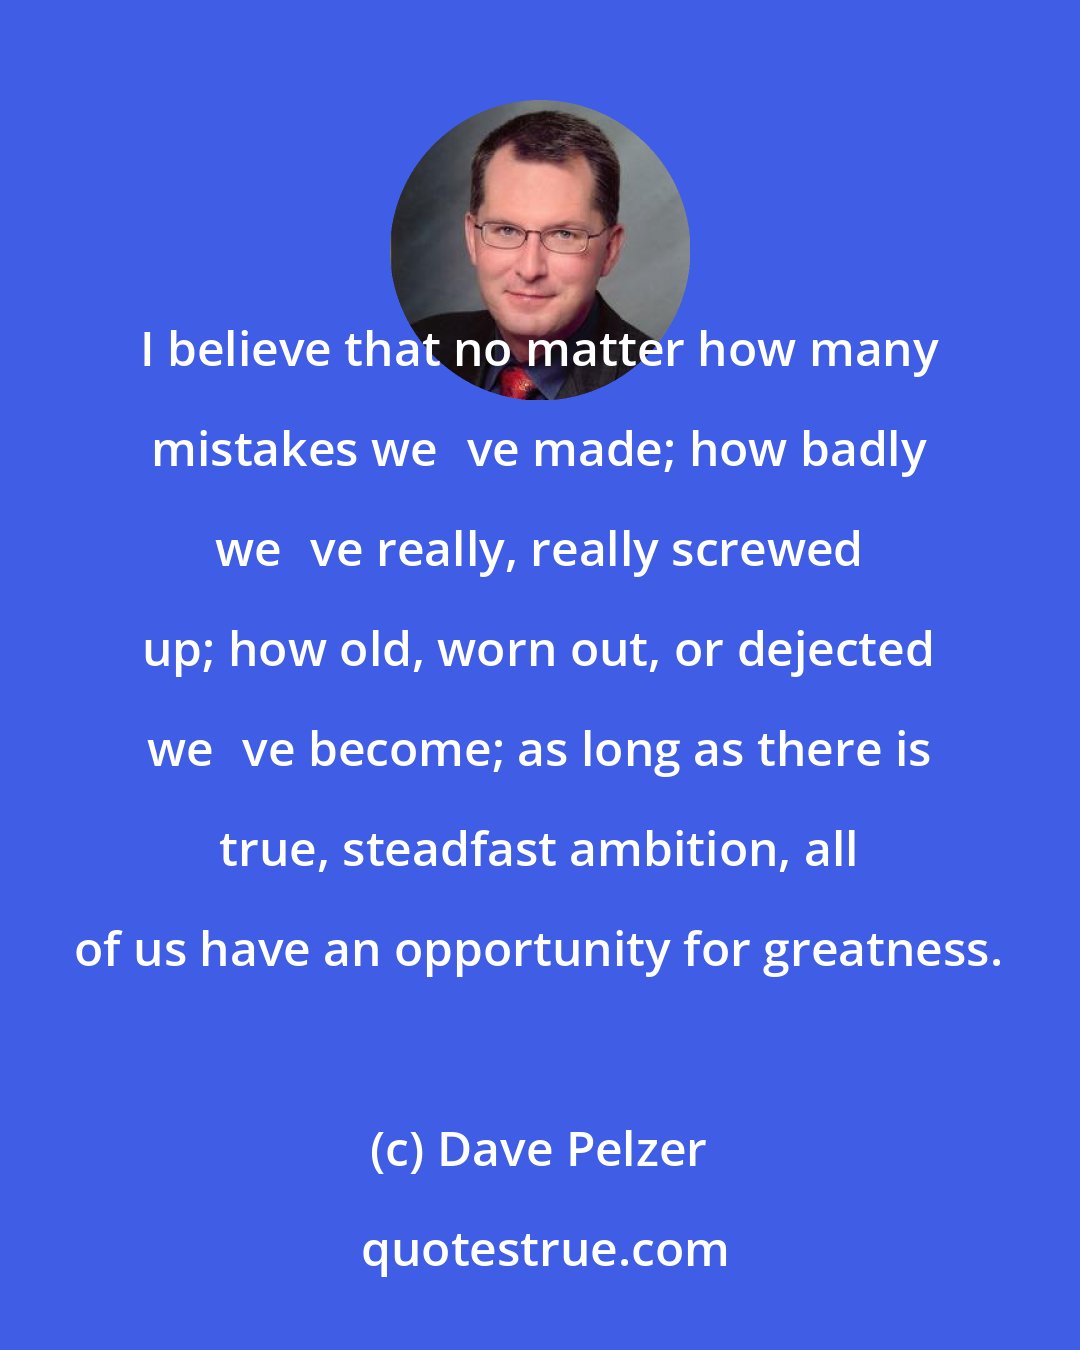 Dave Pelzer: I believe that no matter how many mistakes weve made; how badly weve really, really screwed up; how old, worn out, or dejected weve become; as long as there is true, steadfast ambition, all of us have an opportunity for greatness.